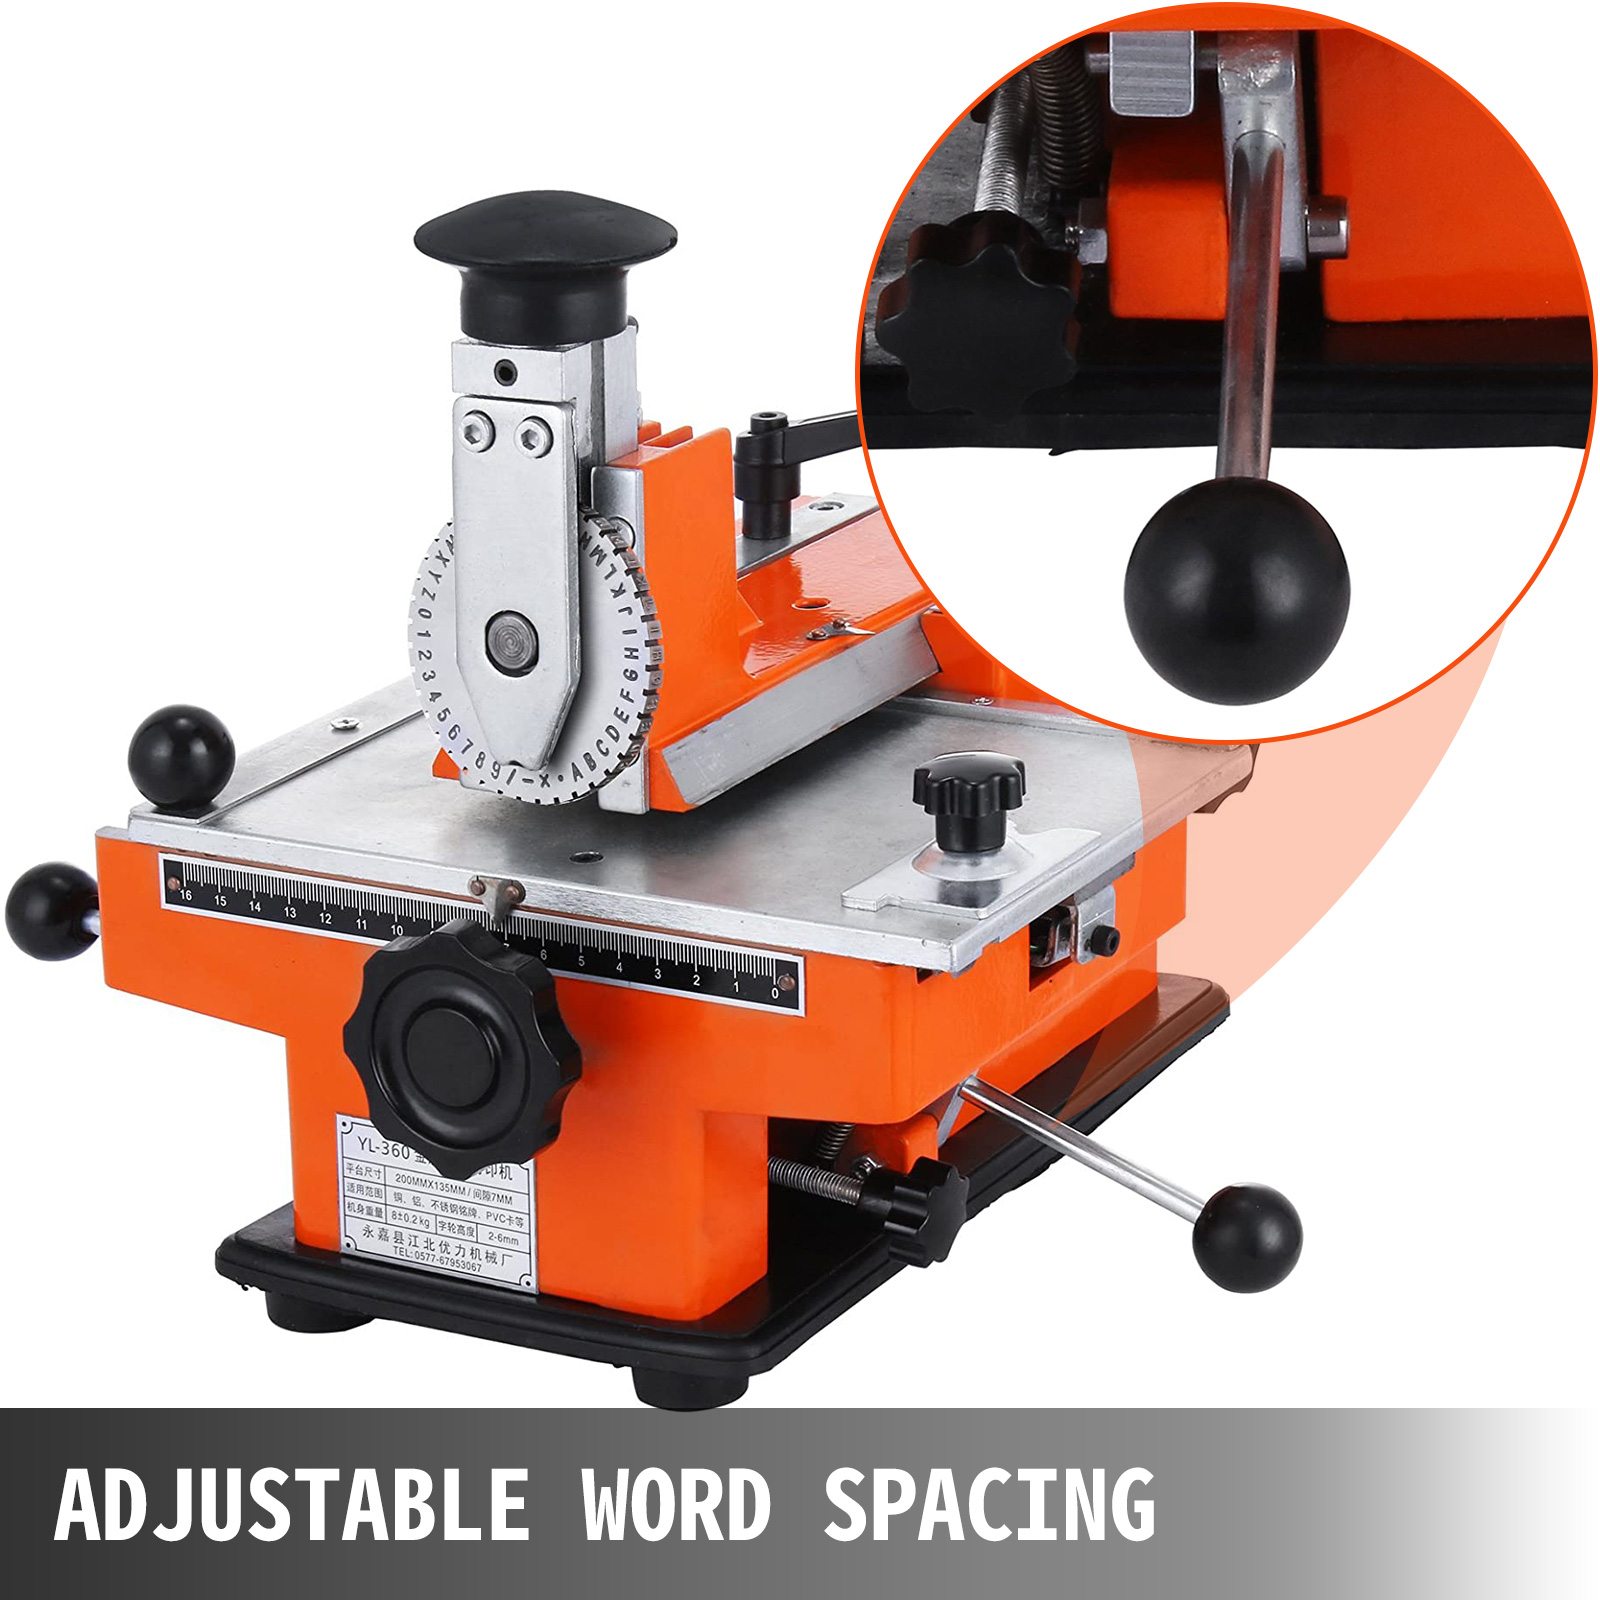  Metal Stainless Steel Stamping Code Dog tag Coder Manual  Stamping Machine Stamping Code Printing Stainless Steel Embossed tag :  Arts, Crafts & Sewing